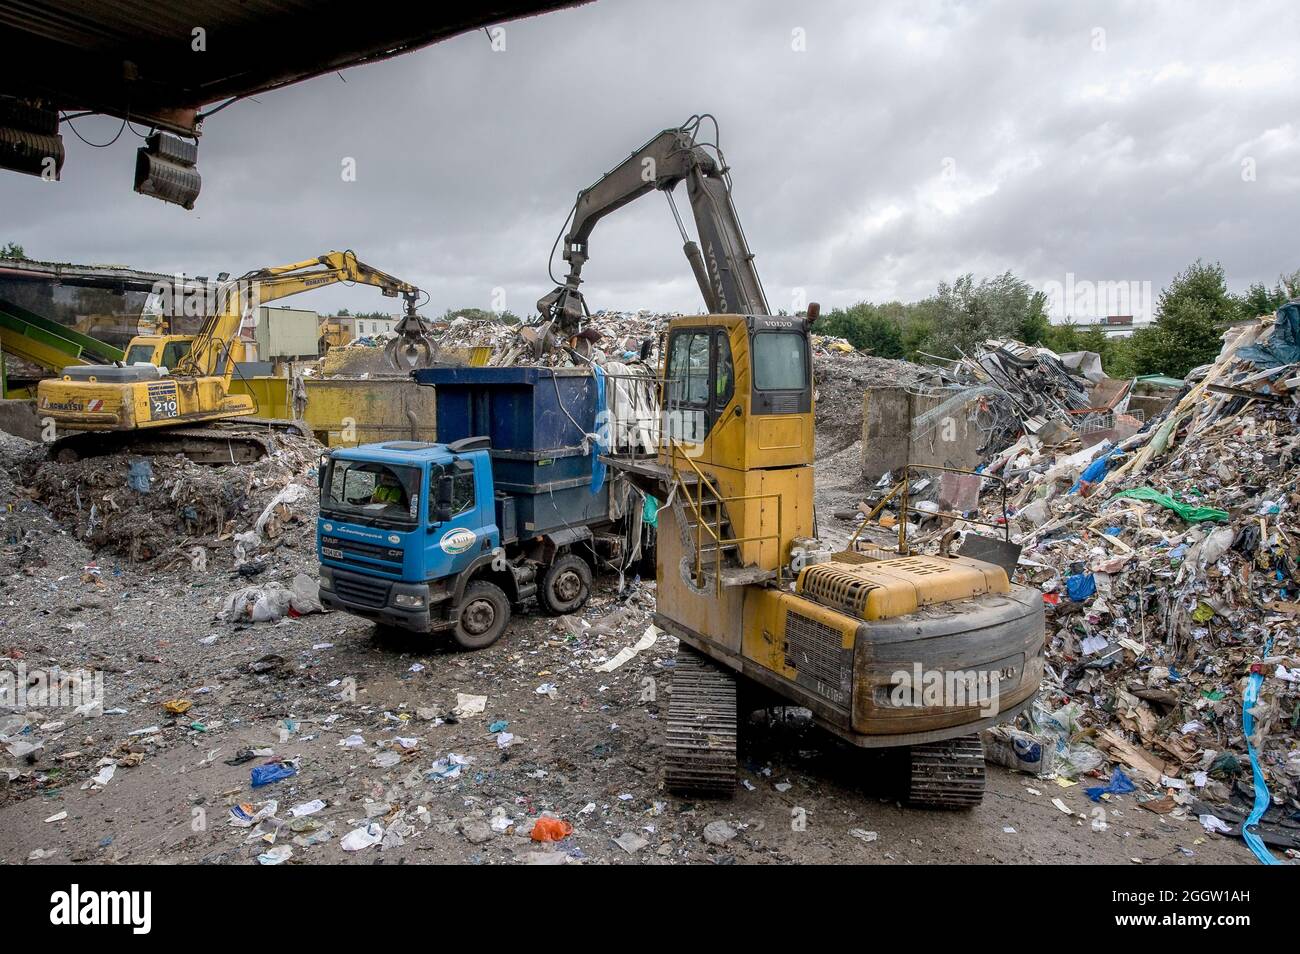 Volvo and Komatsu crawler excavators working at a materials recycling facility in the UK. Stock Photo